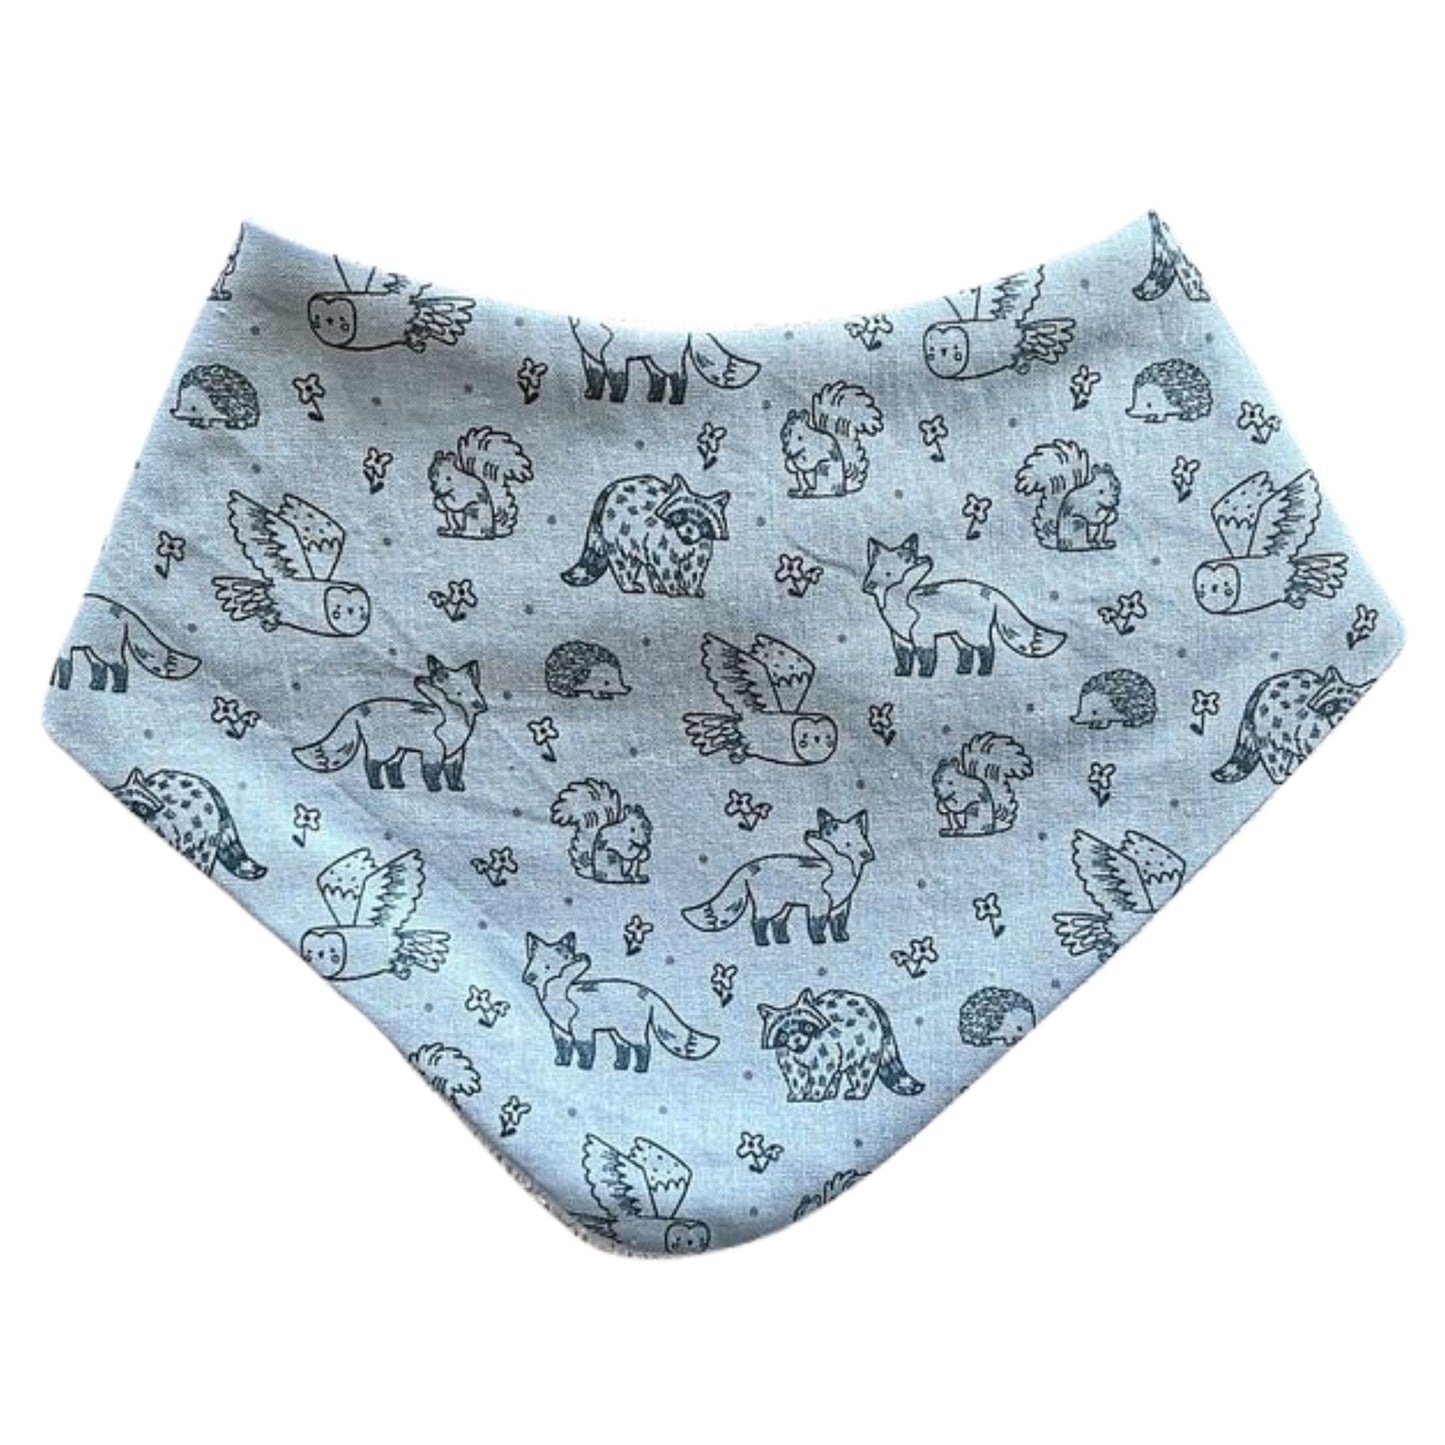 Baby dribble bib in light blue fabric with darker blue woodland animals printed on it.